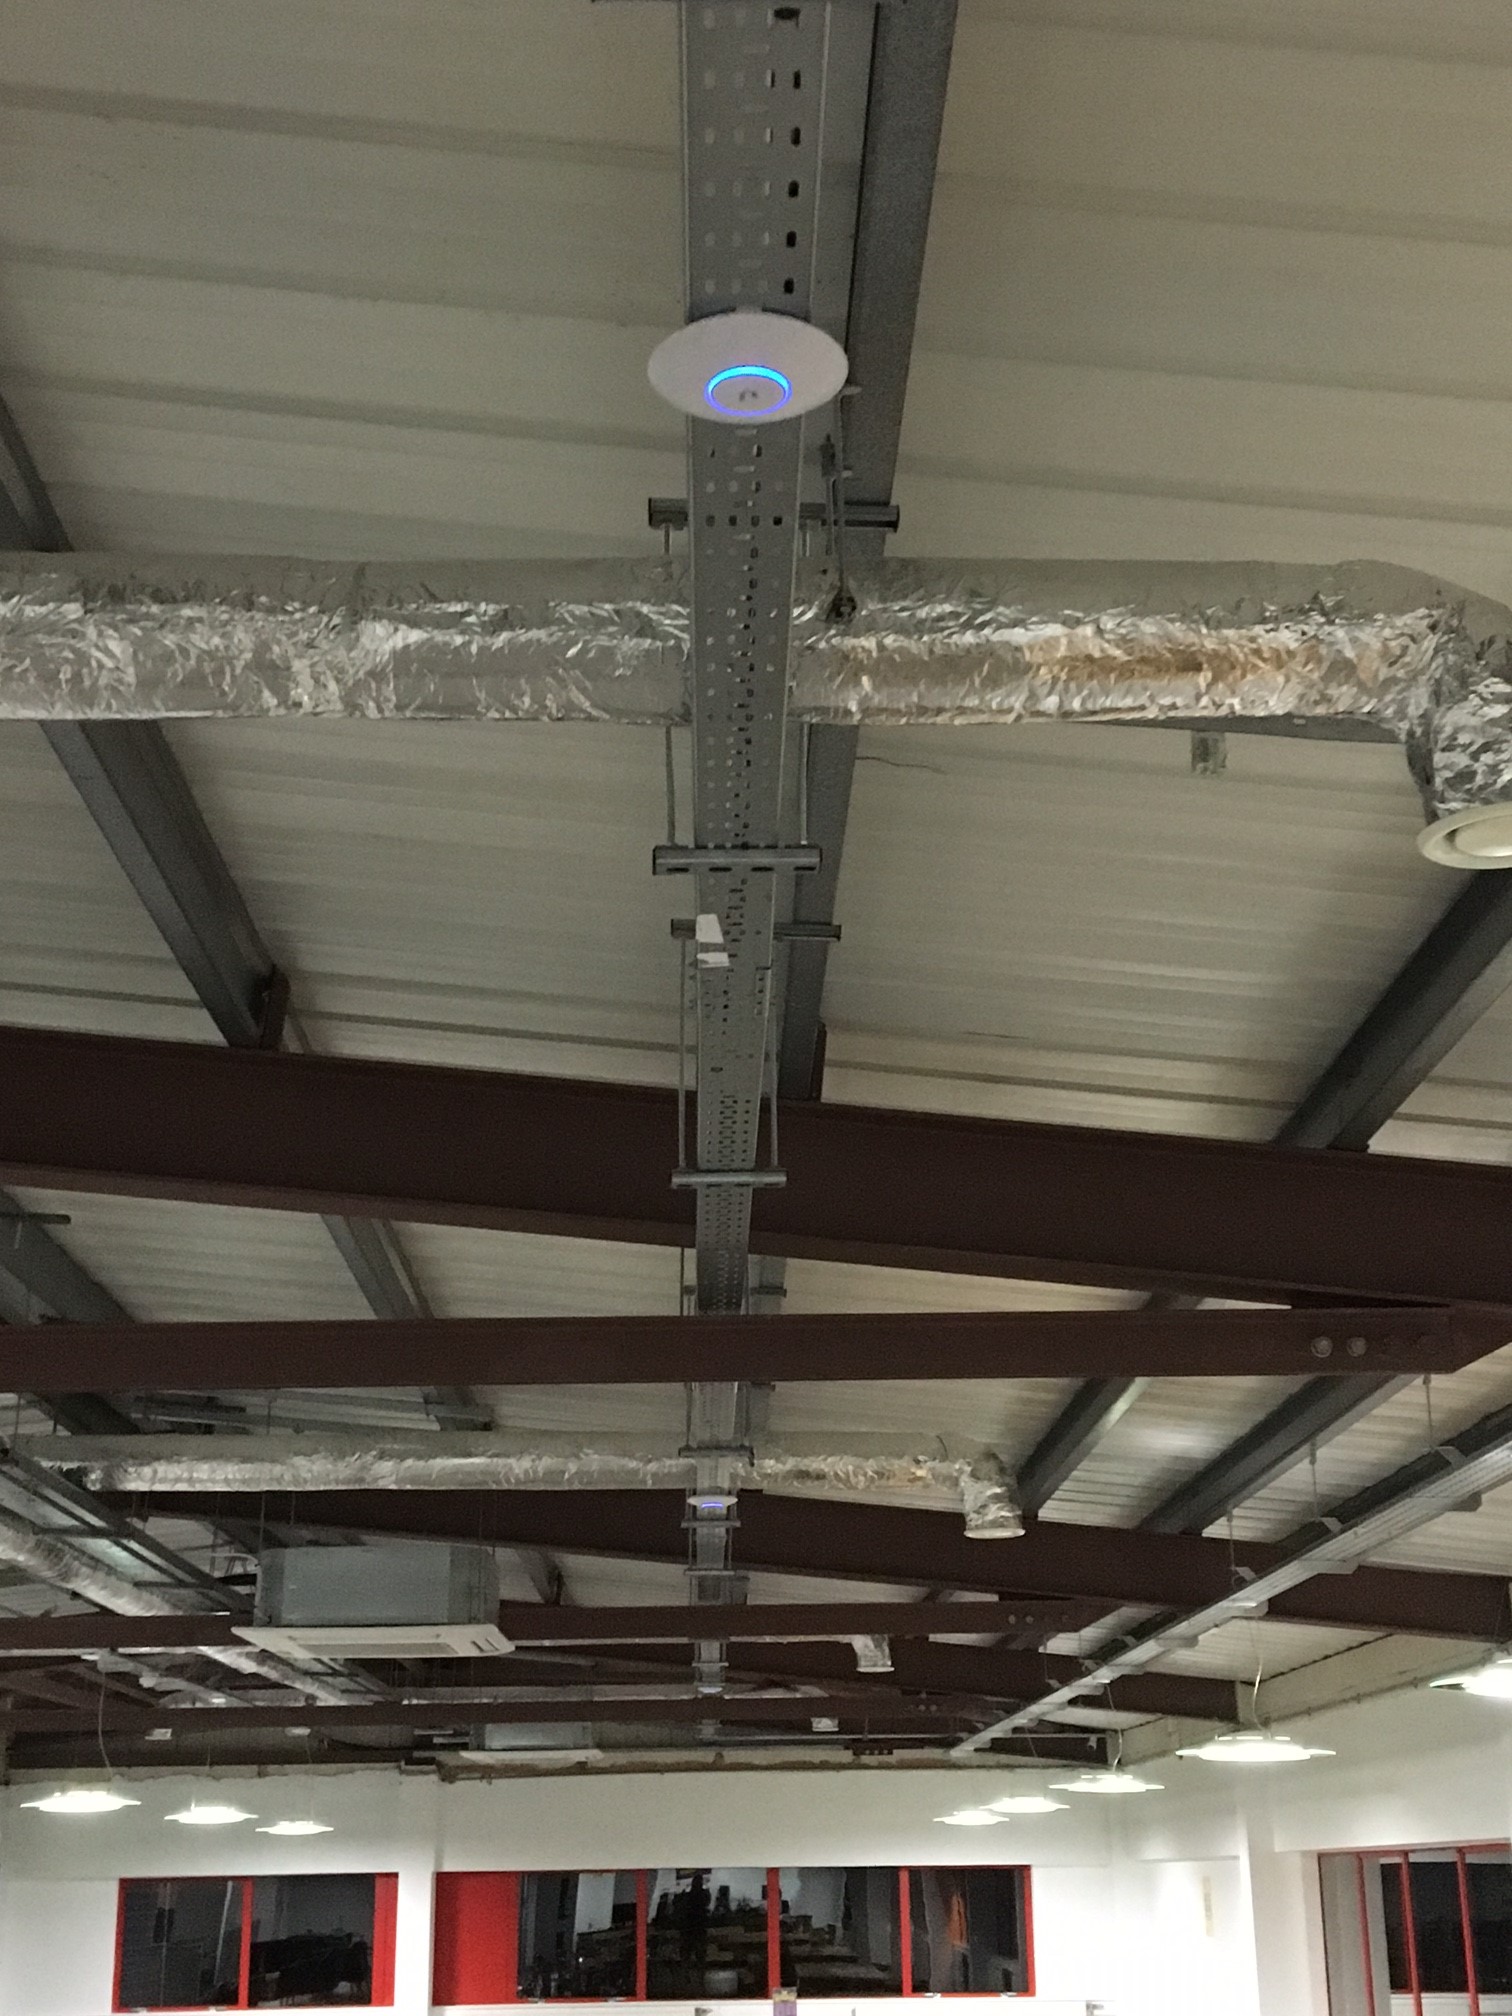 Wireless Access point Installed in Warehouse